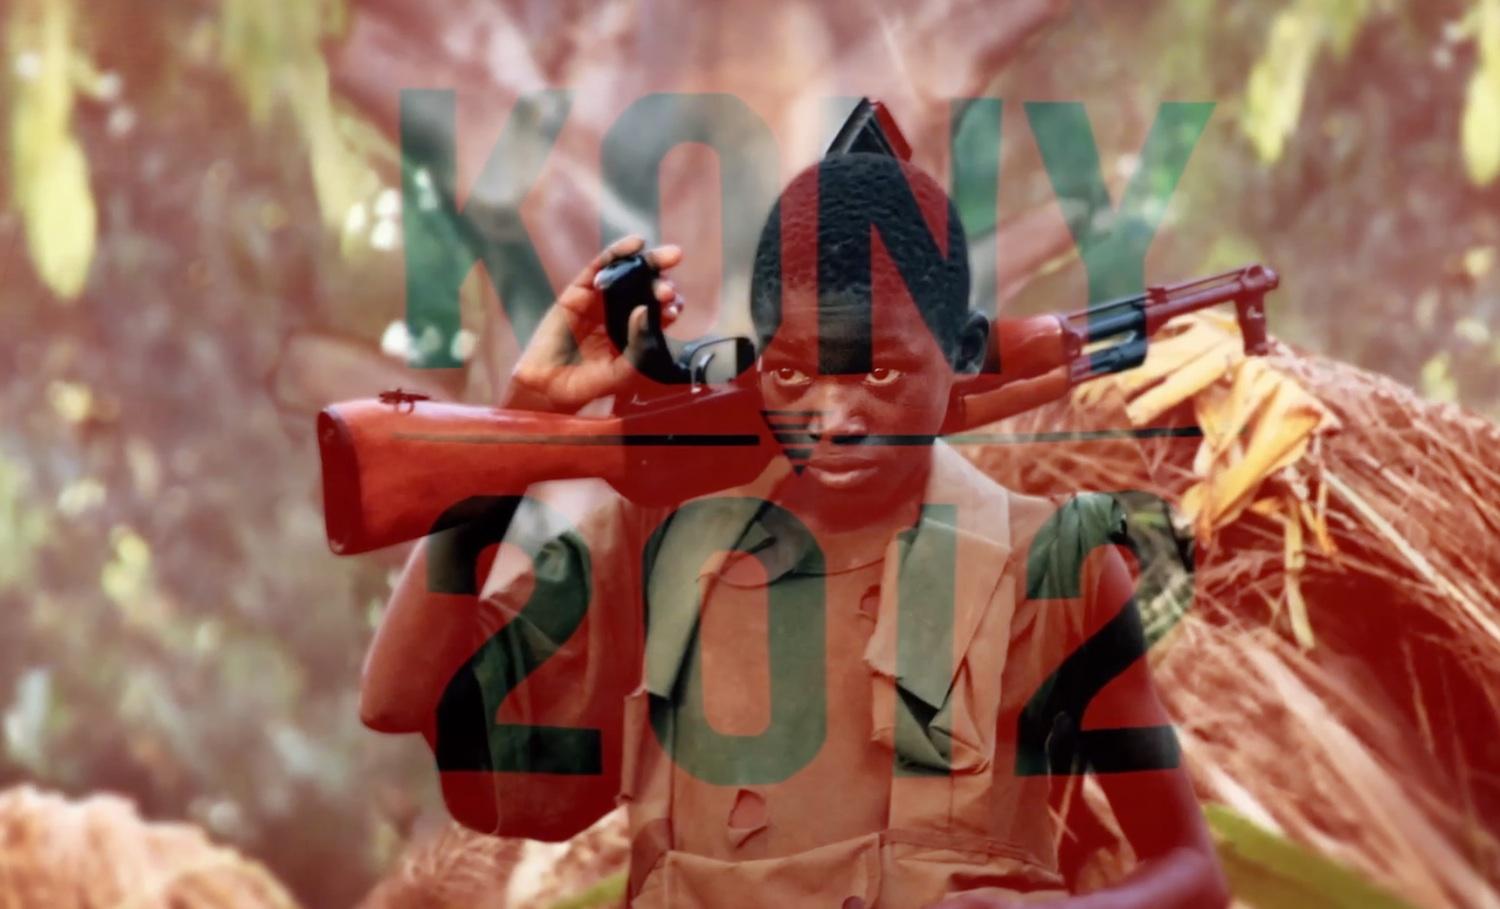 The KONY 2012 campaign by Invisible Children appeals to audiences with emotionally charged photos of child soldiers. (Photo Illustration by Sara Azoulay/The Observer; Courtesy of invisiblechildreninc/youtube.com)